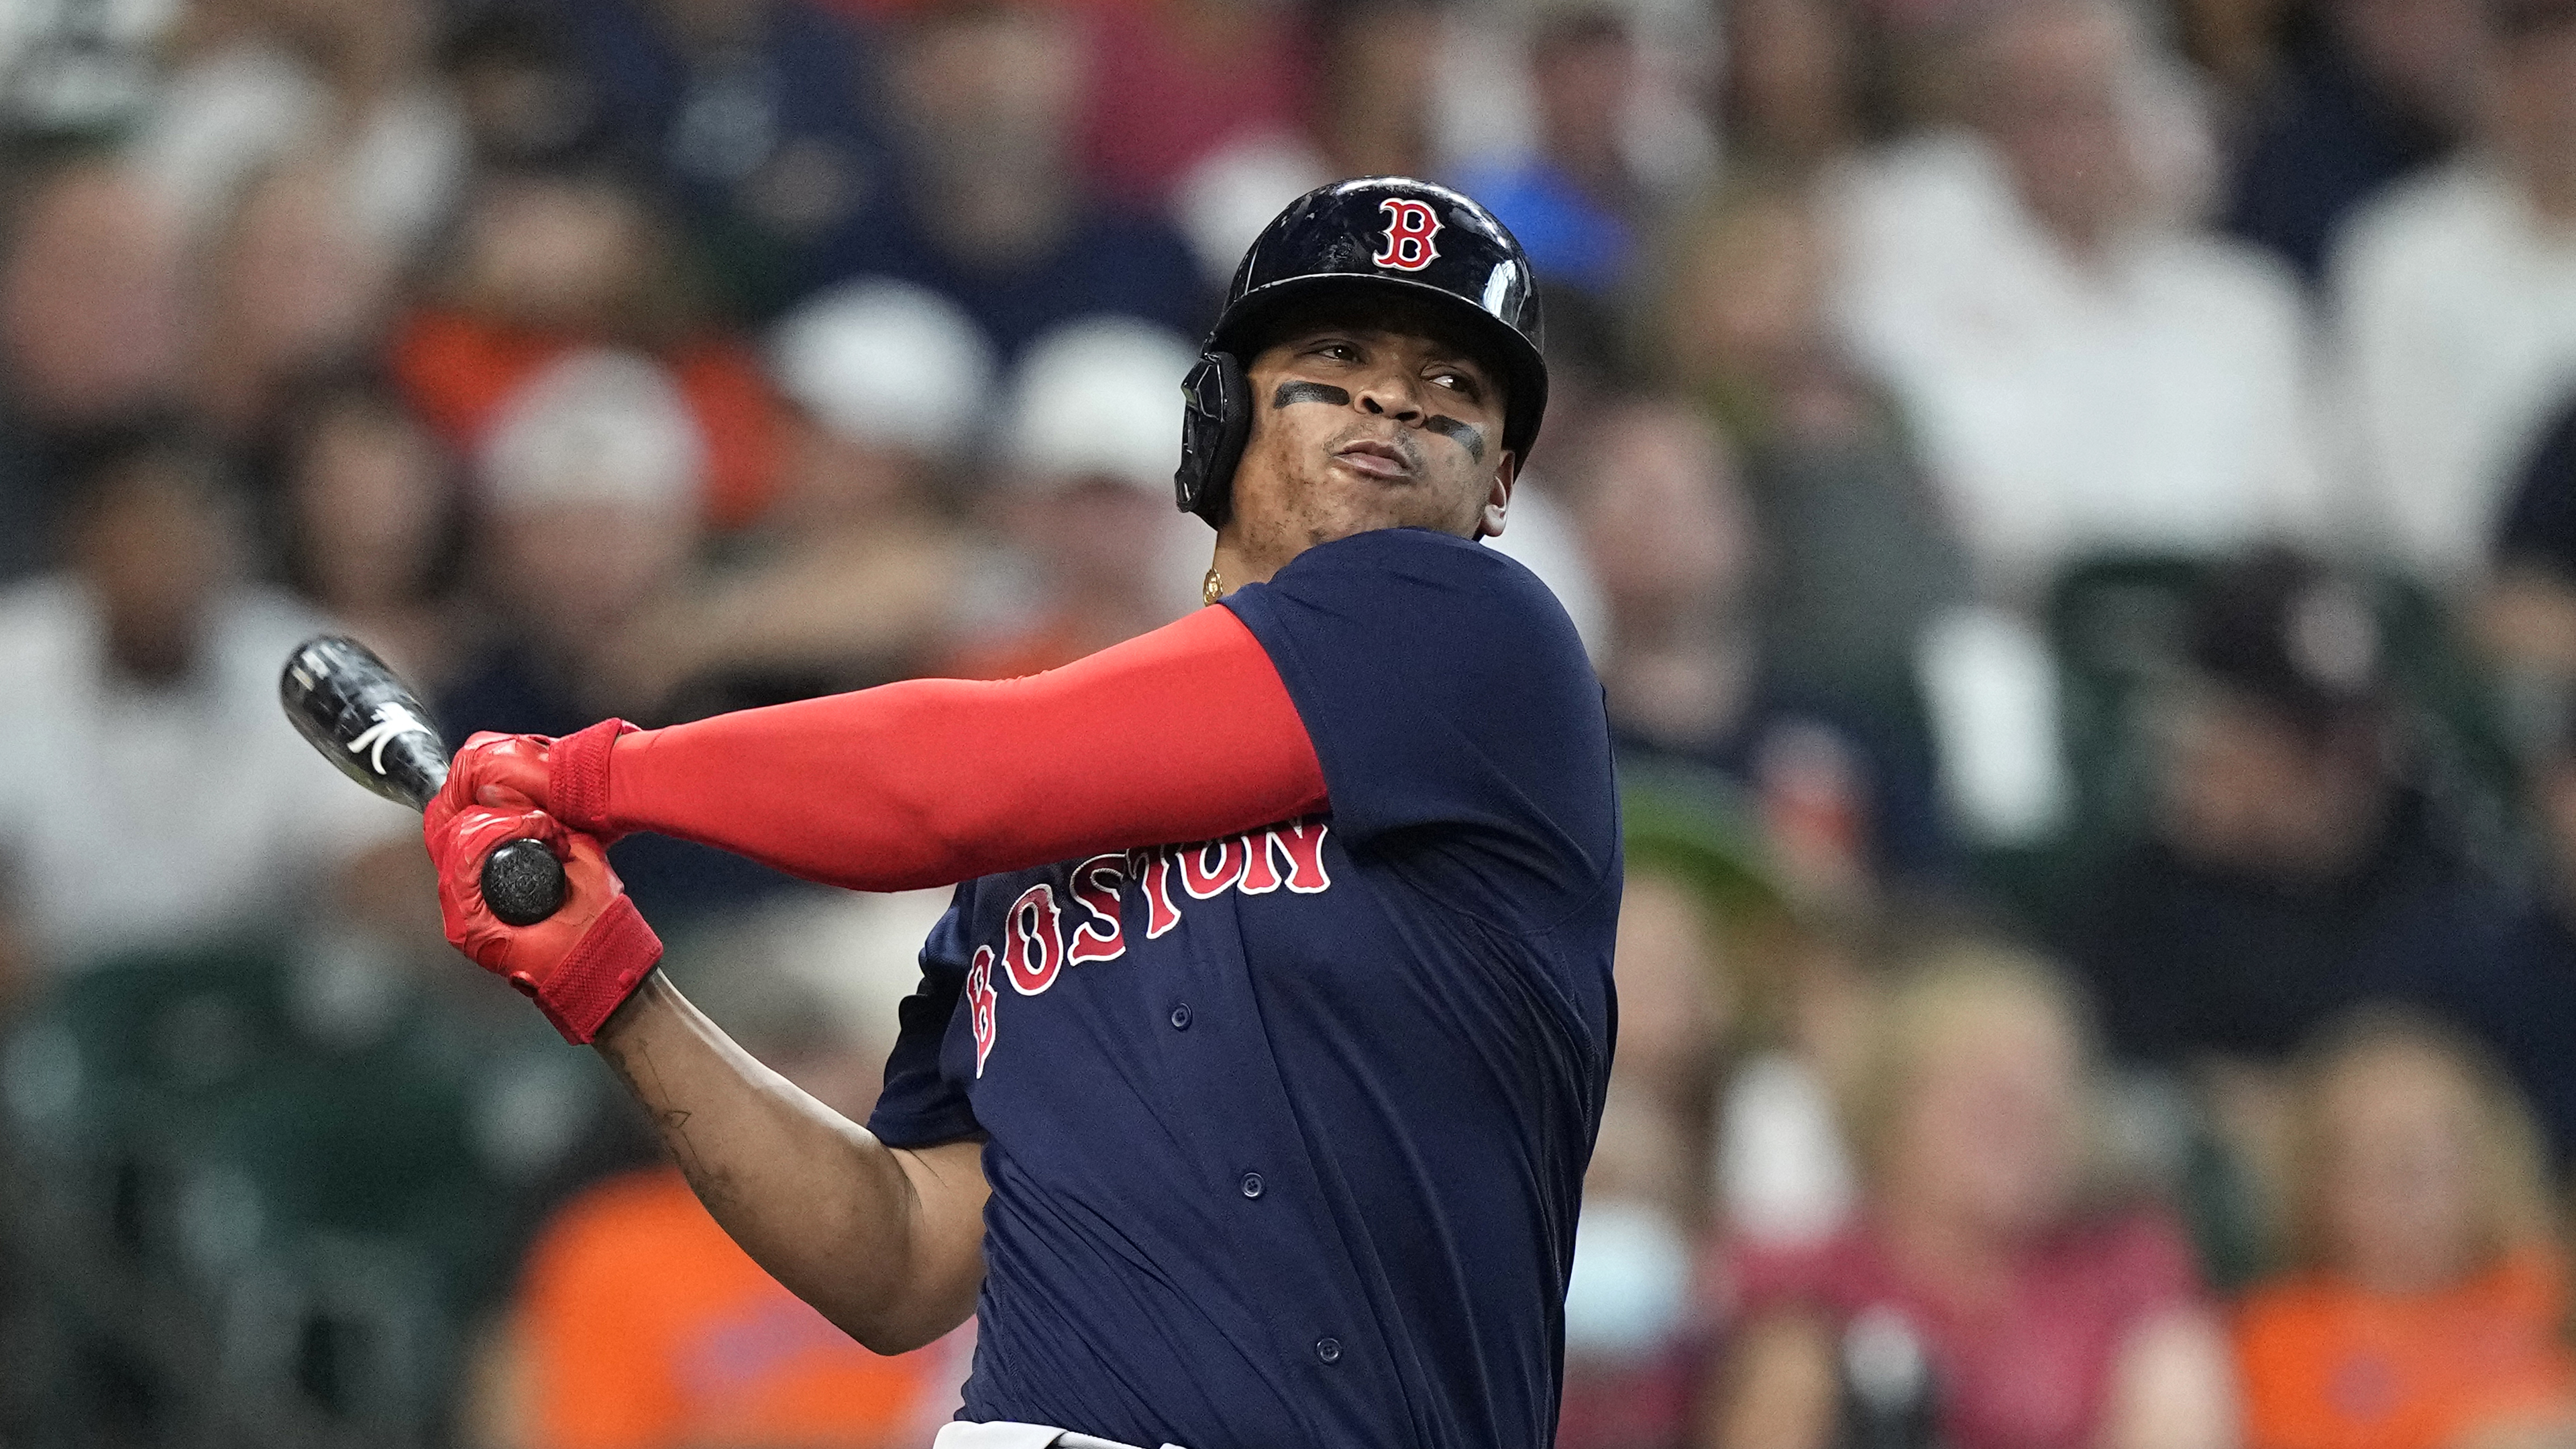 Boston Red Sox' Rafael Devers Out to Sizzling Start - Fastball